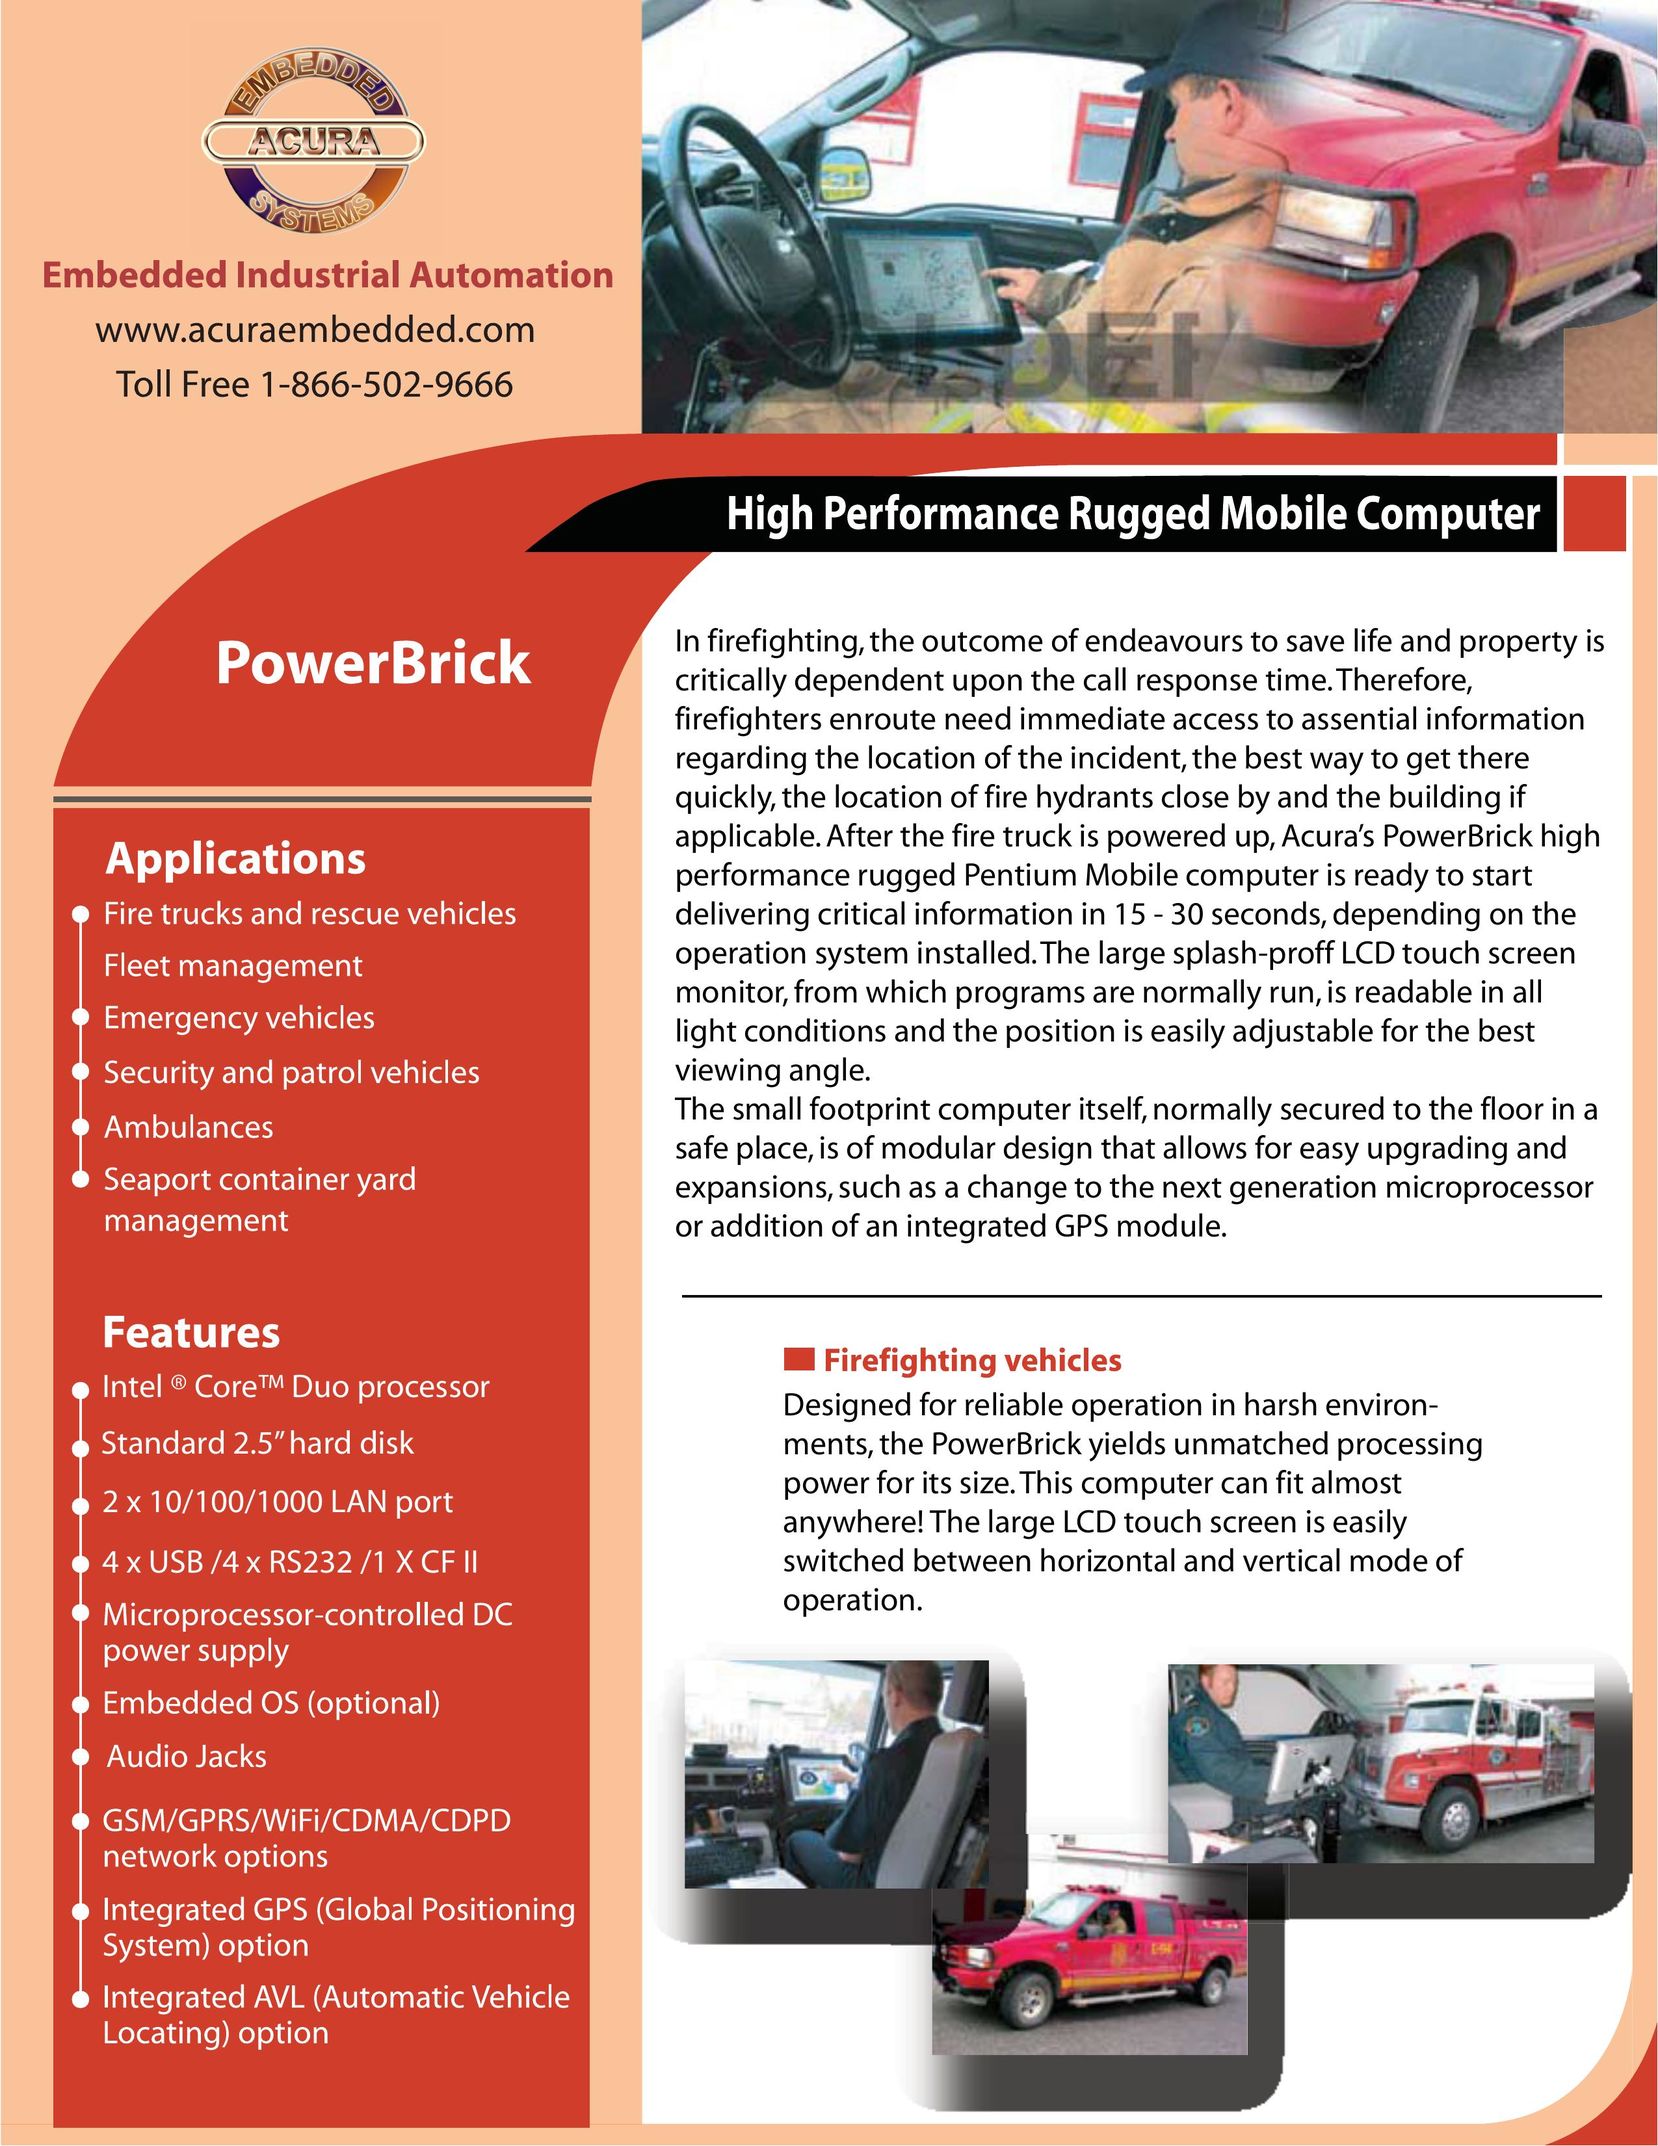 Acura Embedded High Performance Rugged Mobile Computer Personal Computer User Manual